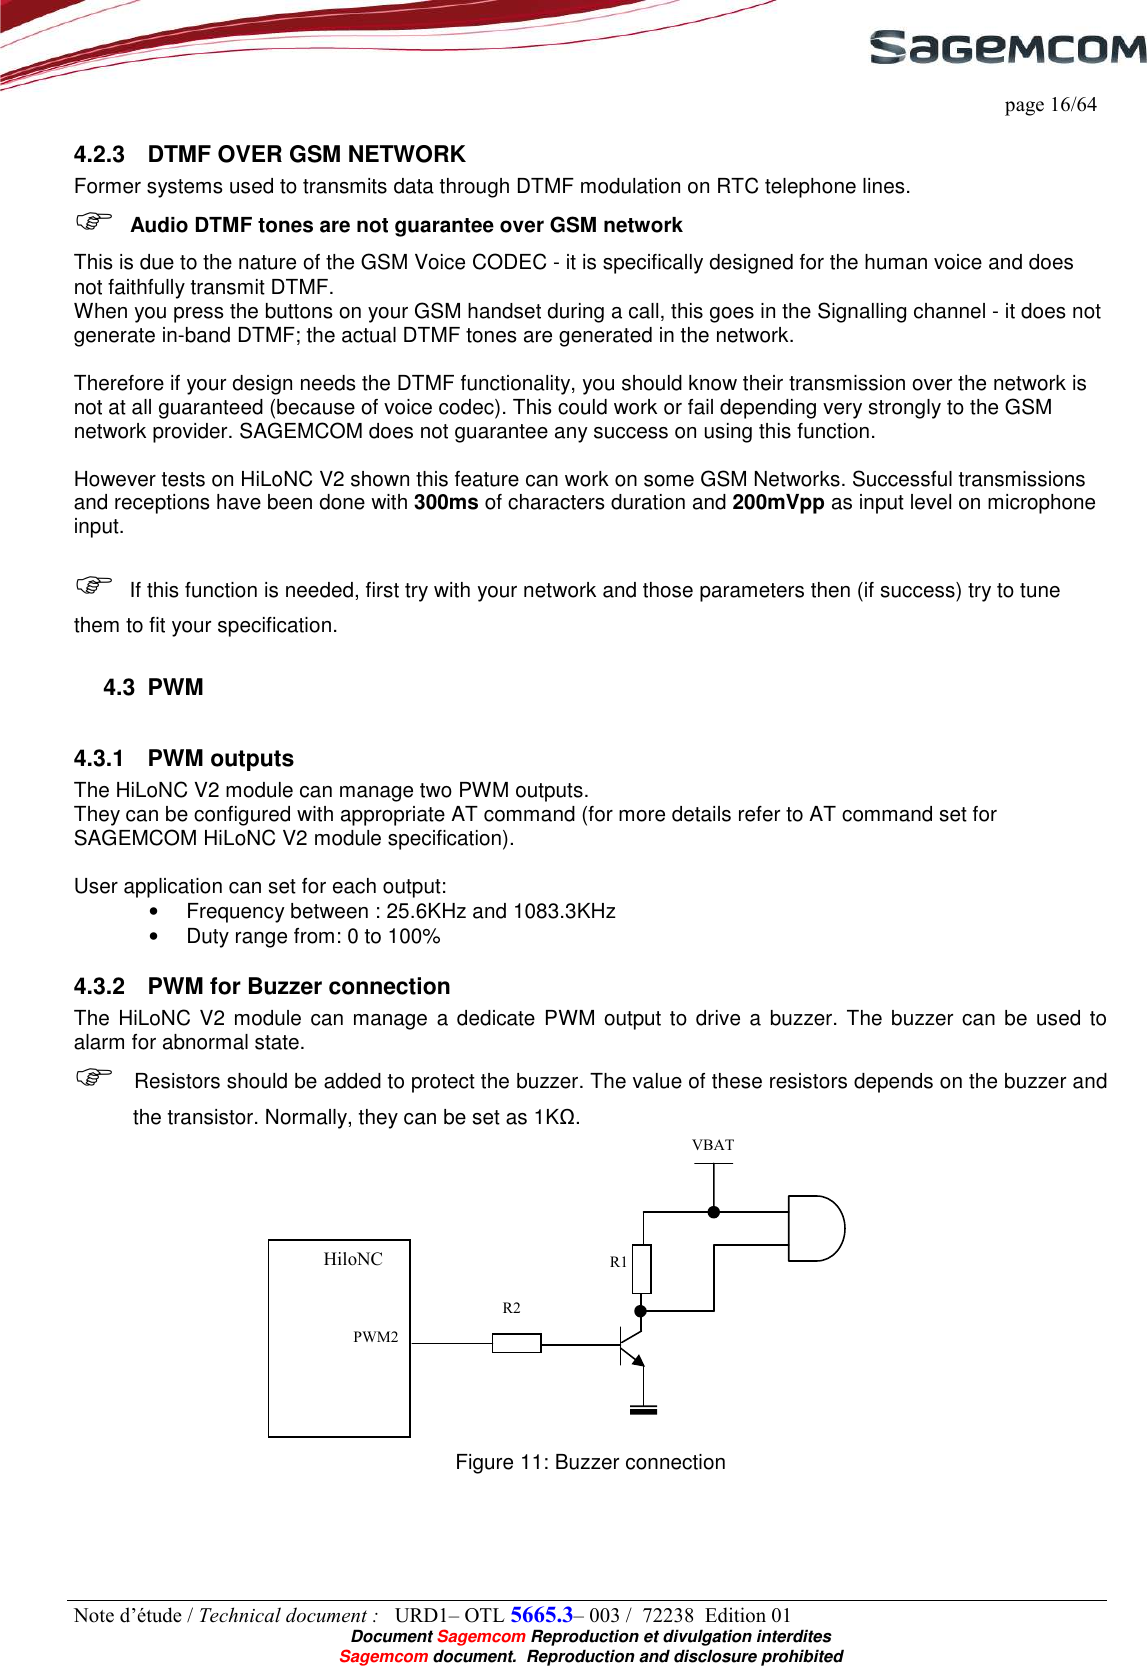     page 16/64 Note d’étude / Technical document :   URD1– OTL 5665.3– 003 /  72238  Edition 01  Document Sagemcom Reproduction et divulgation interdites Sagemcom document.  Reproduction and disclosure prohibited 4.2.3  DTMF OVER GSM NETWORK Former systems used to transmits data through DTMF modulation on RTC telephone lines.  Audio DTMF tones are not guarantee over GSM network This is due to the nature of the GSM Voice CODEC - it is specifically designed for the human voice and does not faithfully transmit DTMF.  When you press the buttons on your GSM handset during a call, this goes in the Signalling channel - it does not generate in-band DTMF; the actual DTMF tones are generated in the network.    Therefore if your design needs the DTMF functionality, you should know their transmission over the network is not at all guaranteed (because of voice codec). This could work or fail depending very strongly to the GSM network provider. SAGEMCOM does not guarantee any success on using this function.  However tests on HiLoNC V2 shown this feature can work on some GSM Networks. Successful transmissions and receptions have been done with 300ms of characters duration and 200mVpp as input level on microphone input.   If this function is needed, first try with your network and those parameters then (if success) try to tune them to fit your specification. 4.3  PWM 4.3.1  PWM outputs The HiLoNC V2 module can manage two PWM outputs. They can be configured with appropriate AT command (for more details refer to AT command set for SAGEMCOM HiLoNC V2 module specification).  User application can set for each output: •  Frequency between : 25.6KHz and 1083.3KHz •  Duty range from: 0 to 100% 4.3.2  PWM for Buzzer connection The HiLoNC V2 module can manage a dedicate  PWM output to drive a buzzer. The buzzer can be used to alarm for abnormal state.  Resistors should be added to protect the buzzer. The value of these resistors depends on the buzzer and the transistor. Normally, they can be set as 1KΩ.  Figure 11: Buzzer connection R1 R2 HiloNC VBAT PWM2 